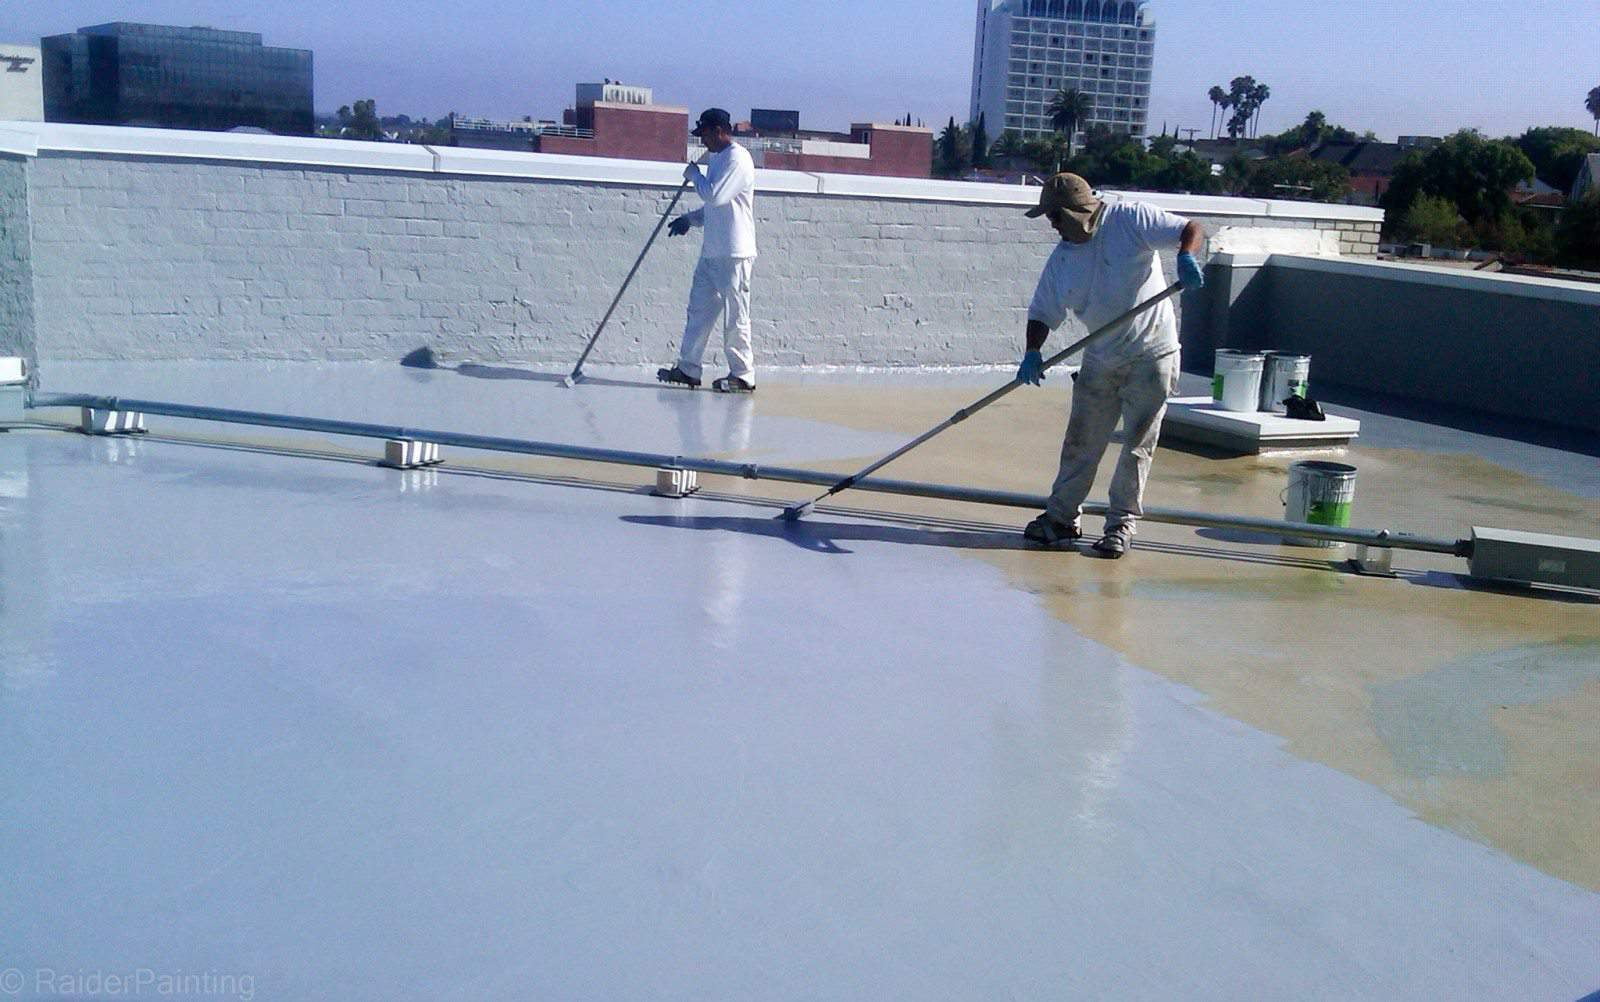 Waterproofing a Balcony Can Add a Pleasant Feel While Taking Rest and Fresh Air